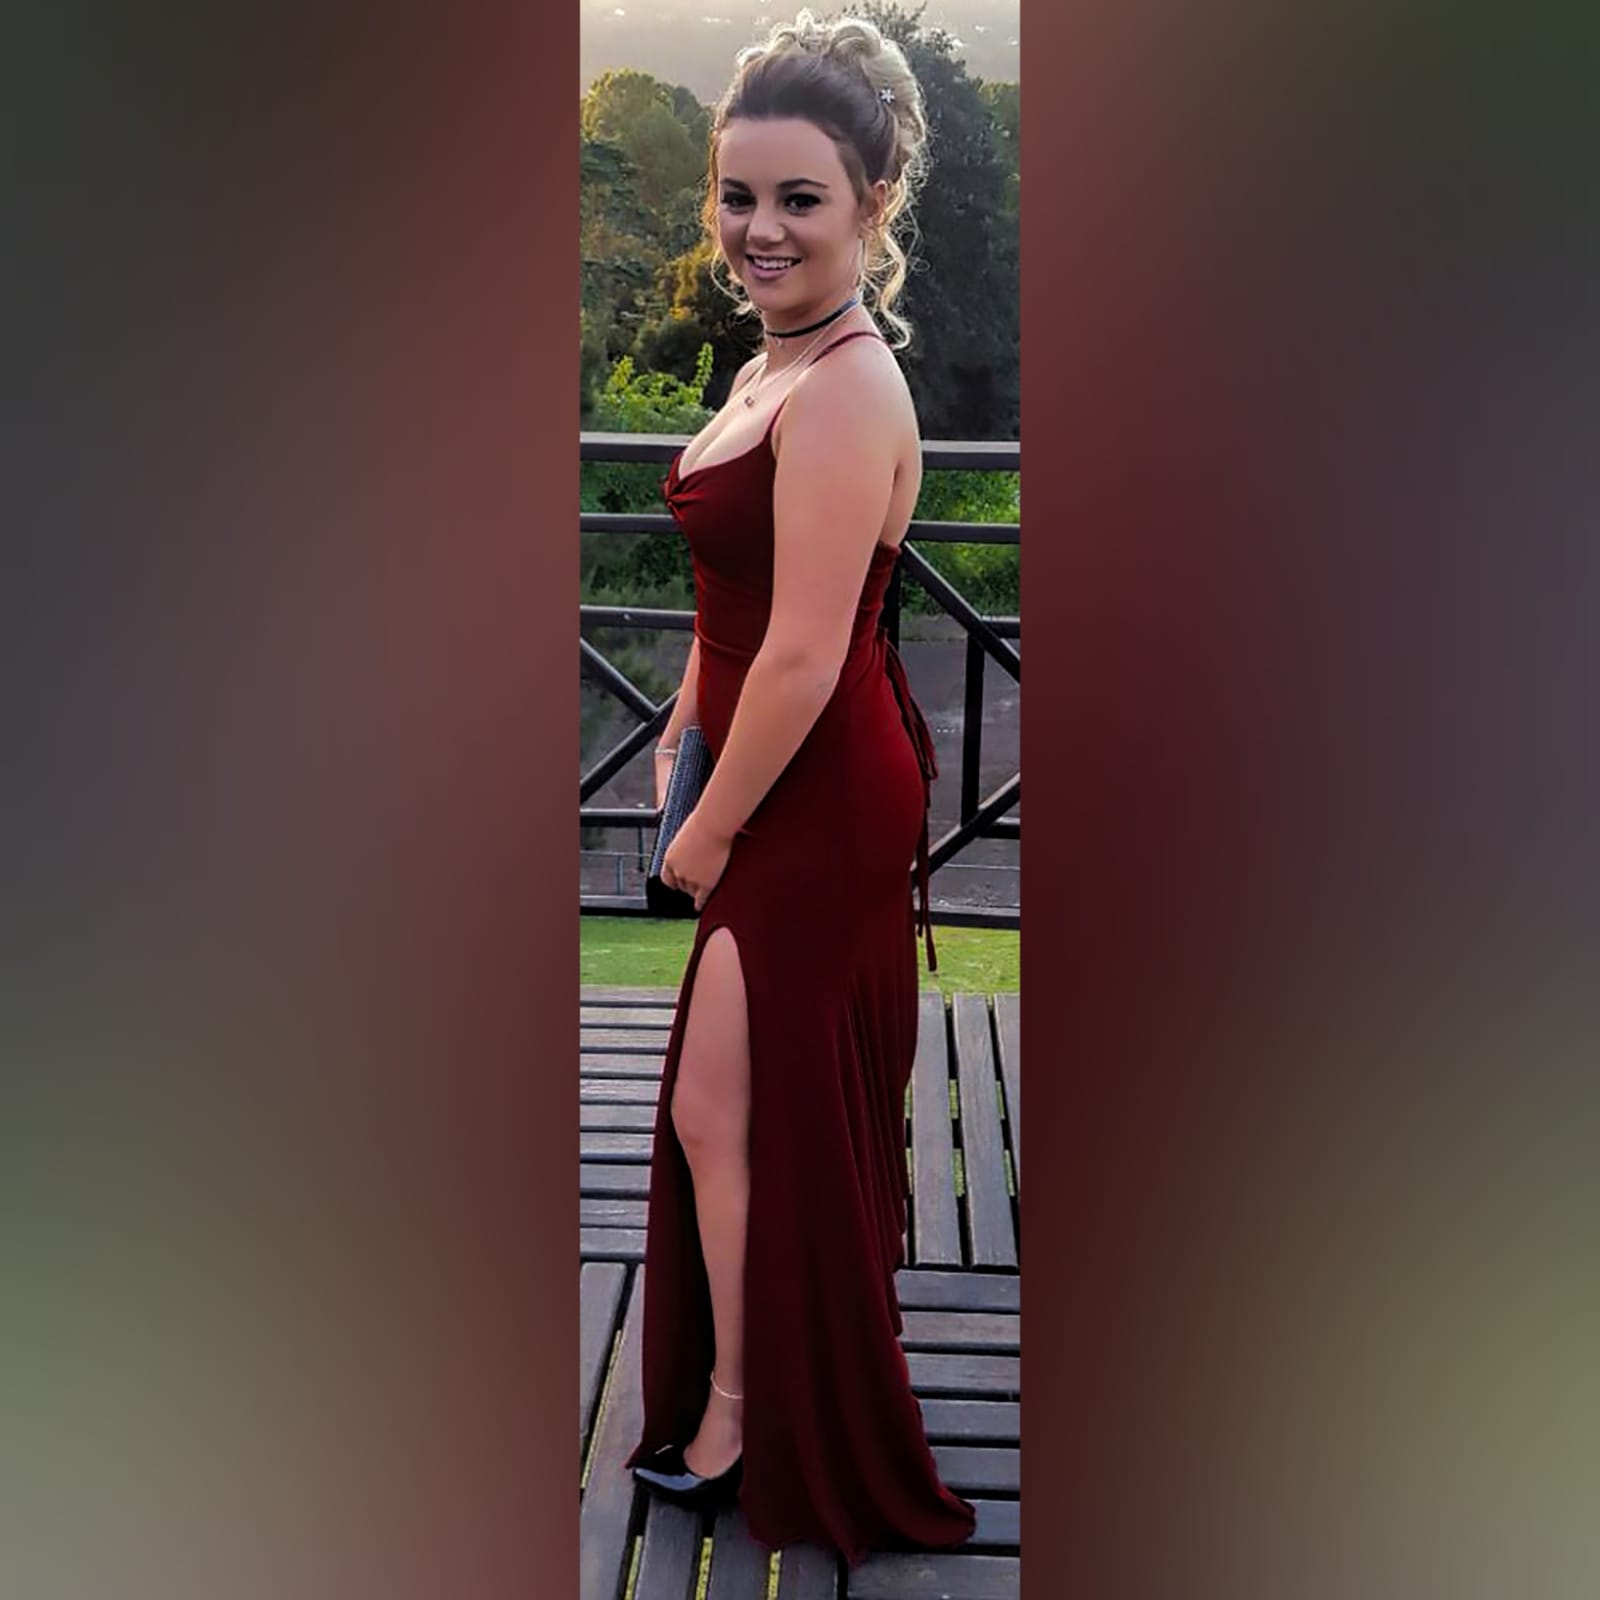 Maroon lace-up back long simple prom dress 6 maroon lace-up back long simple prom dress with thin shoulder straps, high slit and a small train. Lace-up back to adjust the fit.